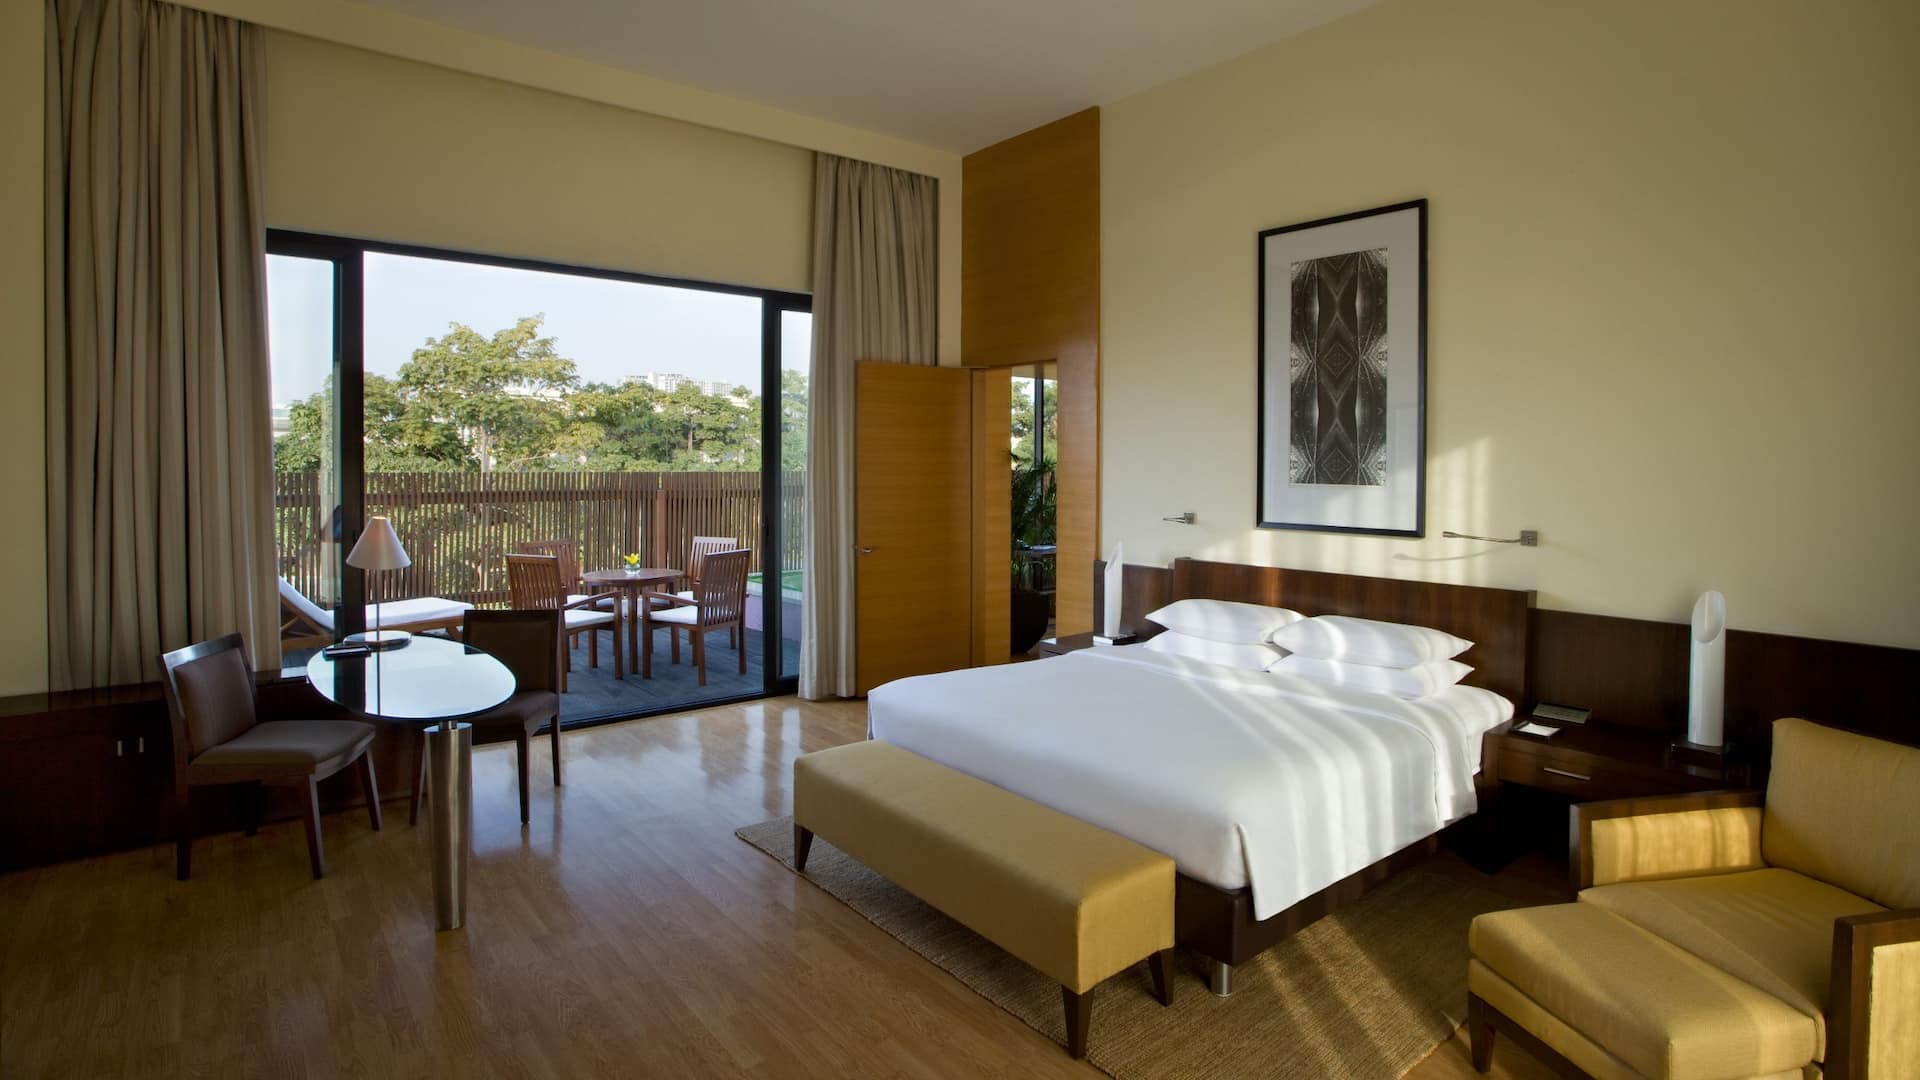 Wide Angle view of Hyatt Executive Suite with a king bed and partial view of terrace balcony having sitting space for 4 people